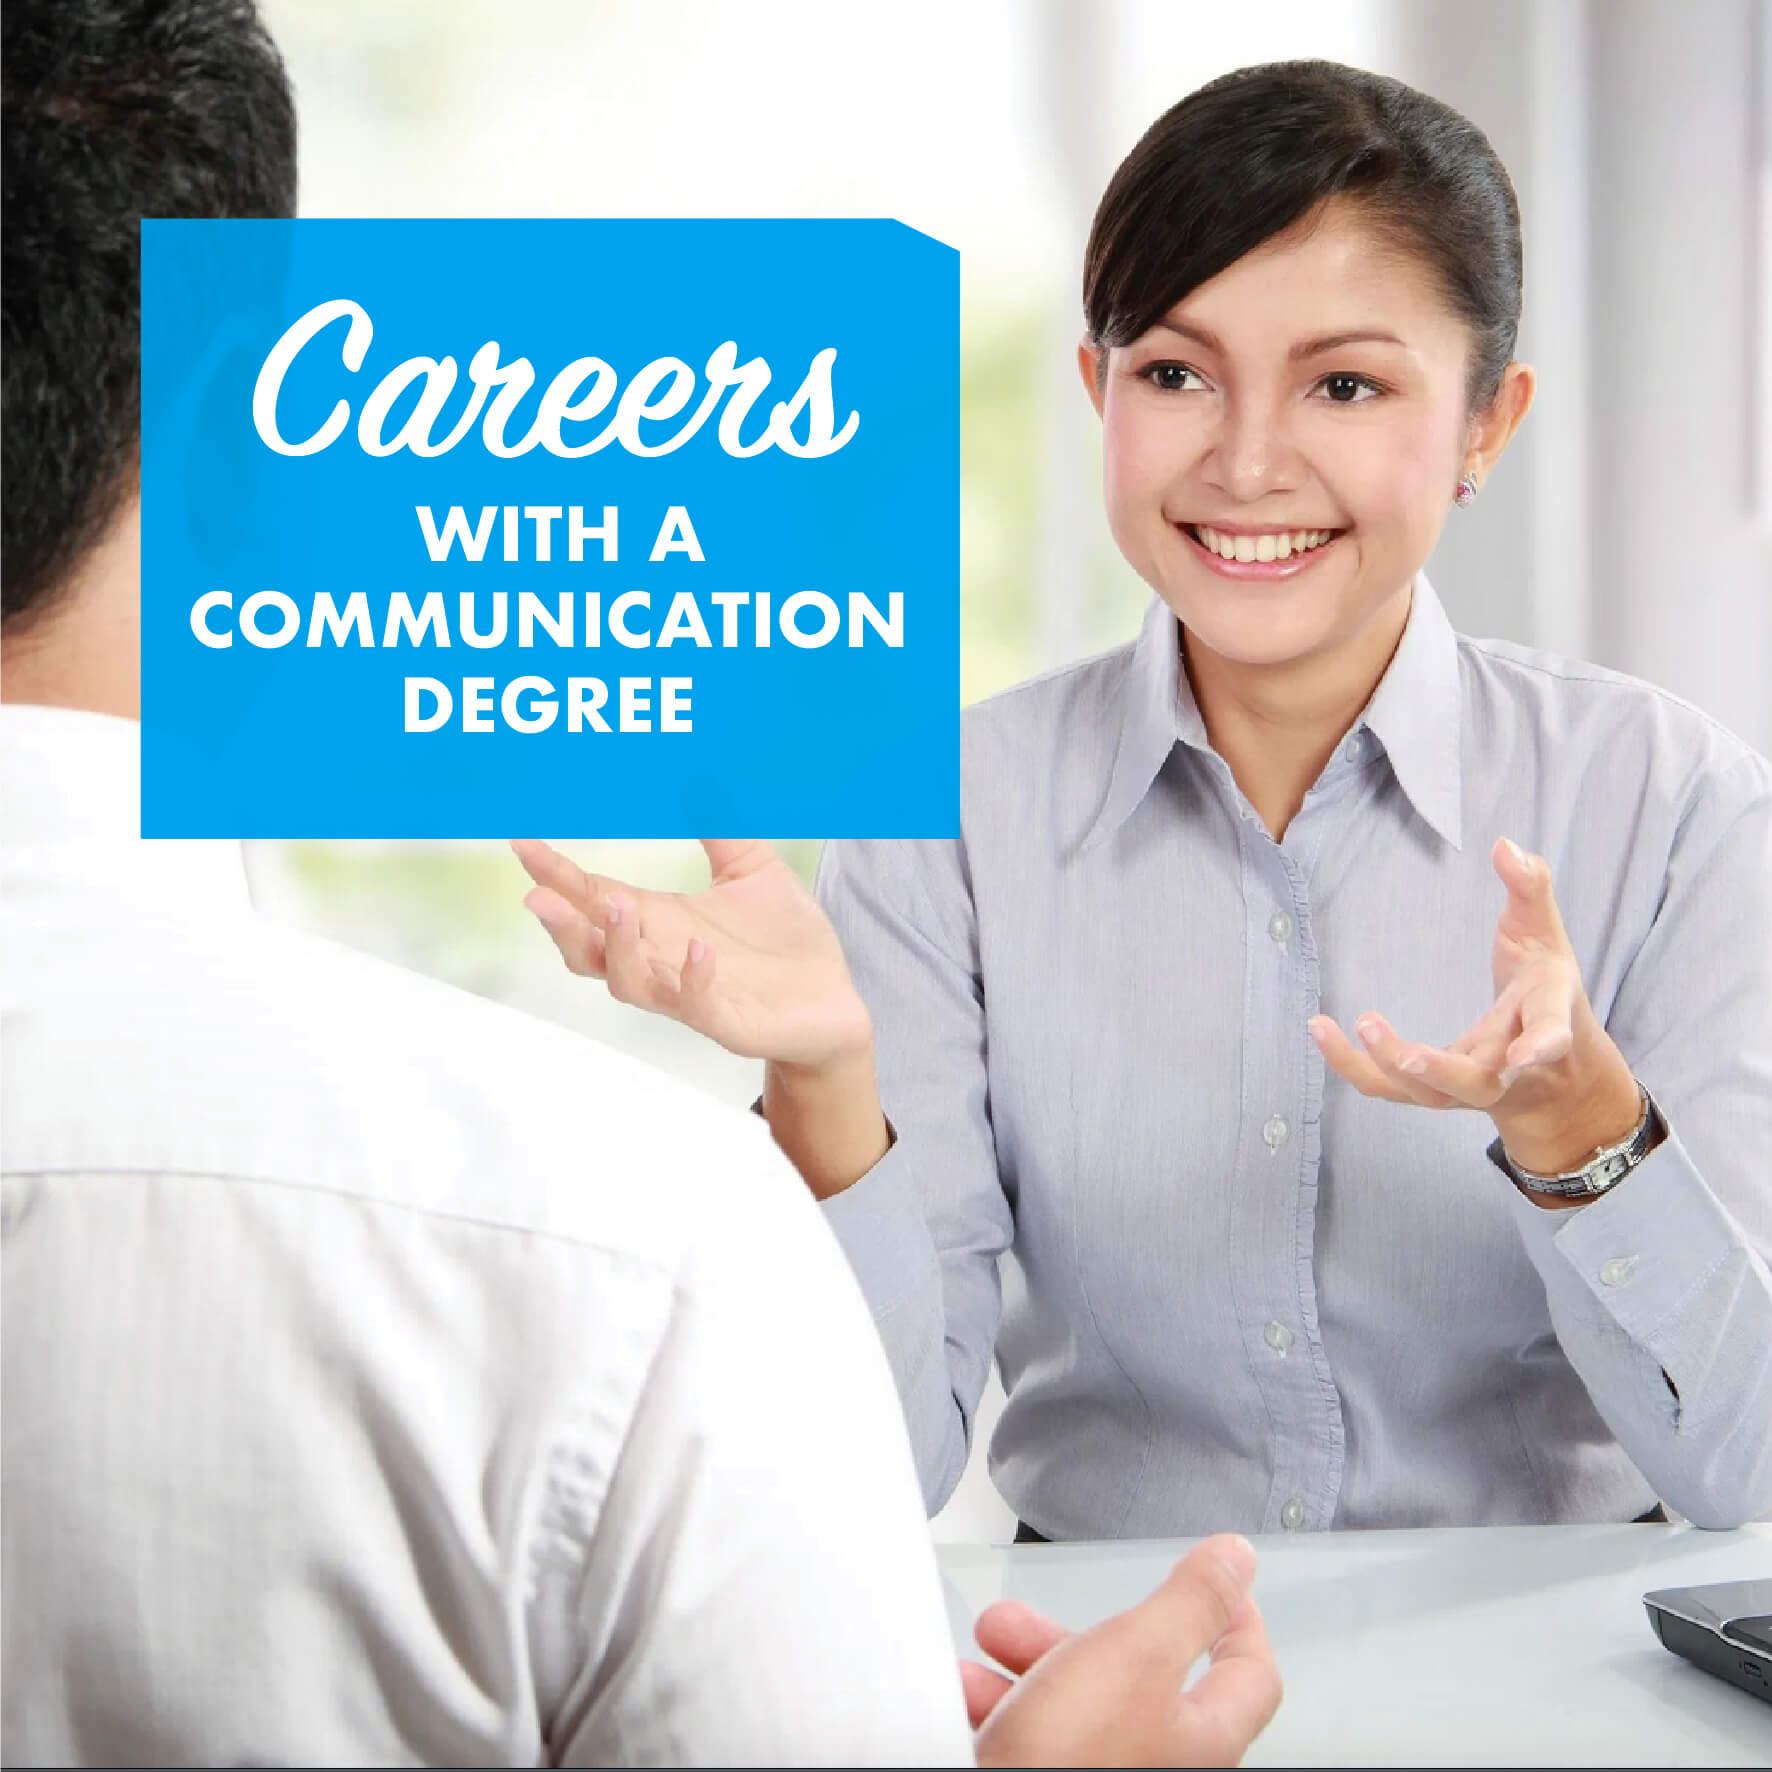 Careers with a Communication Degree